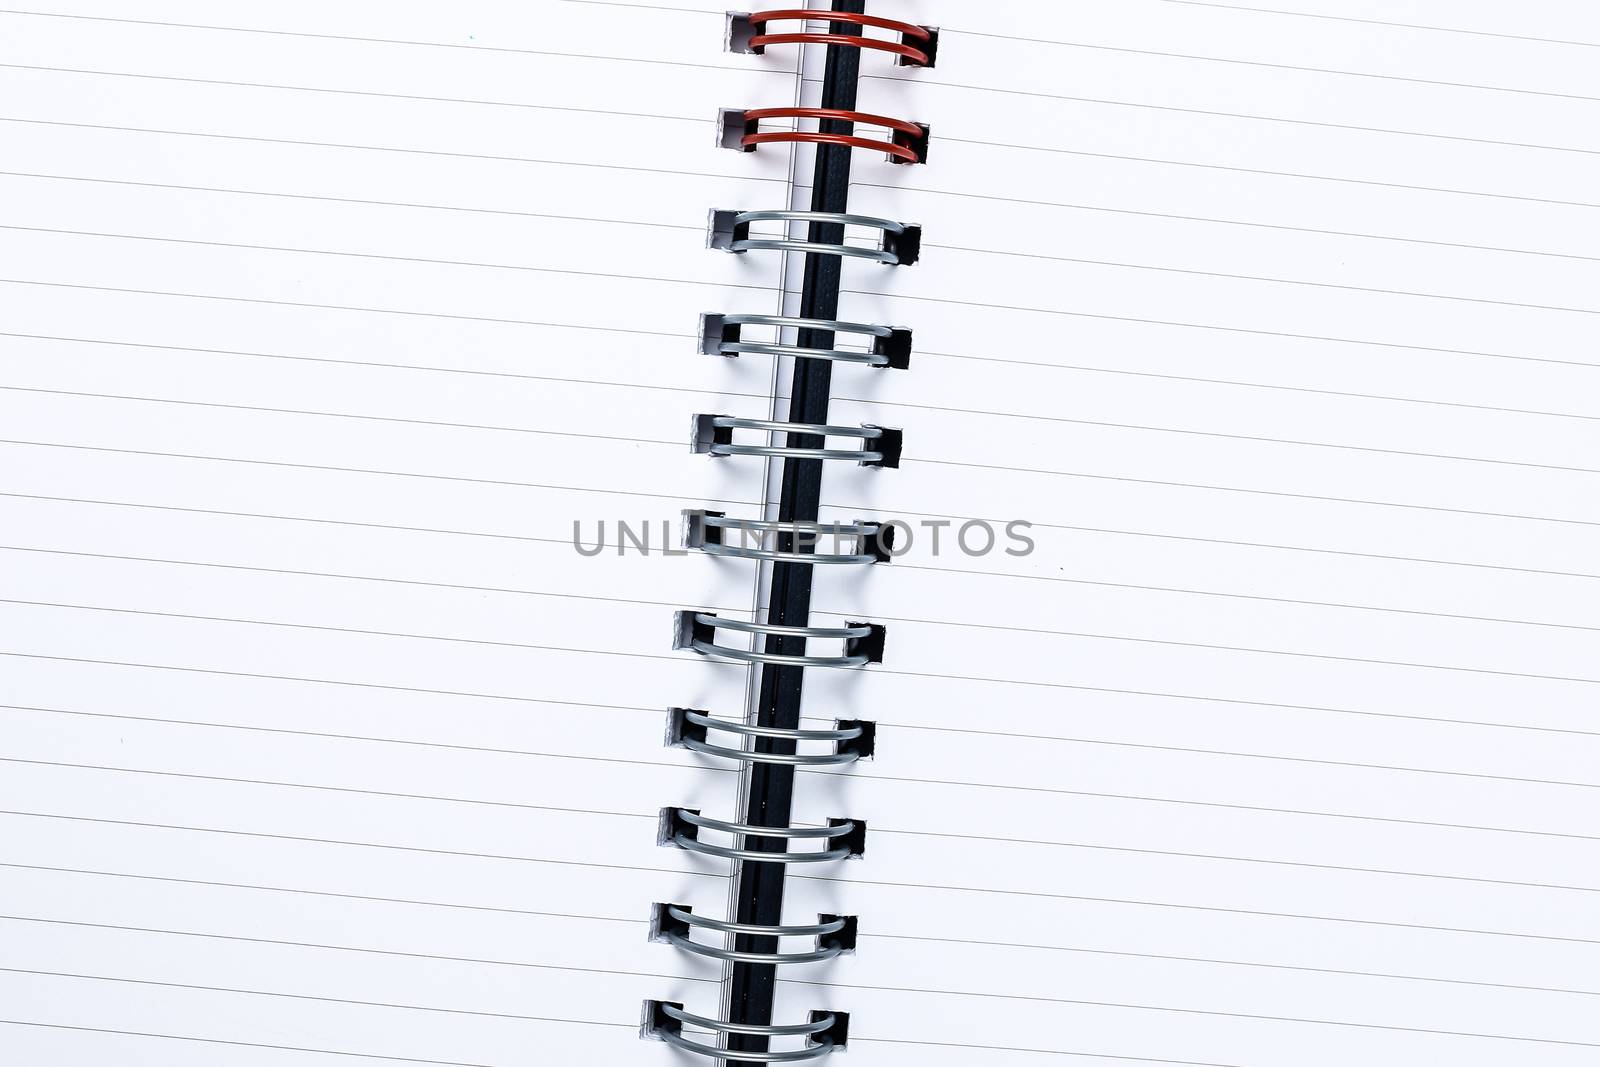 empty pages of opened notebook on wooden table, business, education